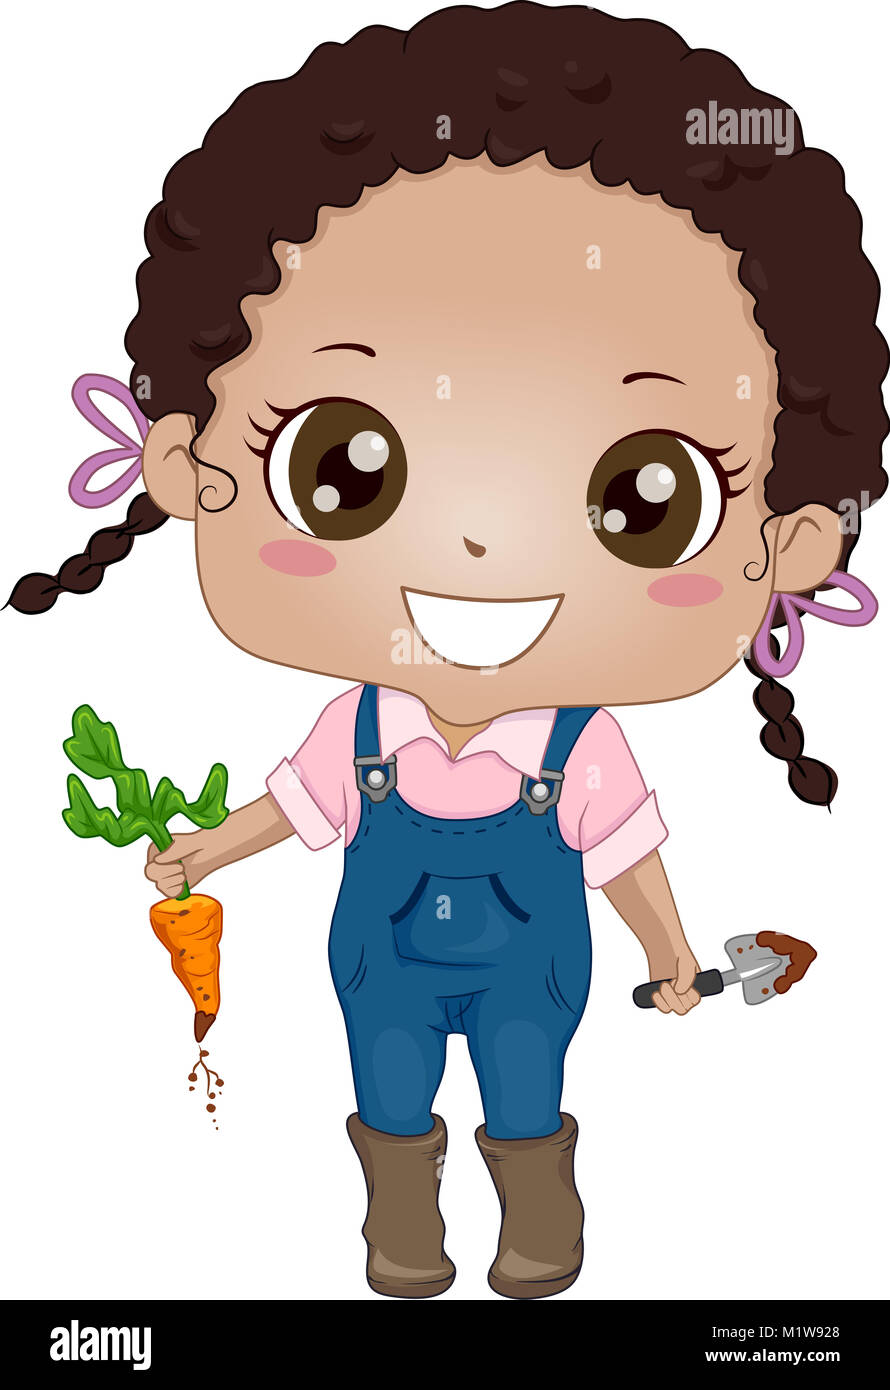 Illustration of a African Kid Gardening, Holding a Freshly Picked Carrot and a Shovel Stock Photo